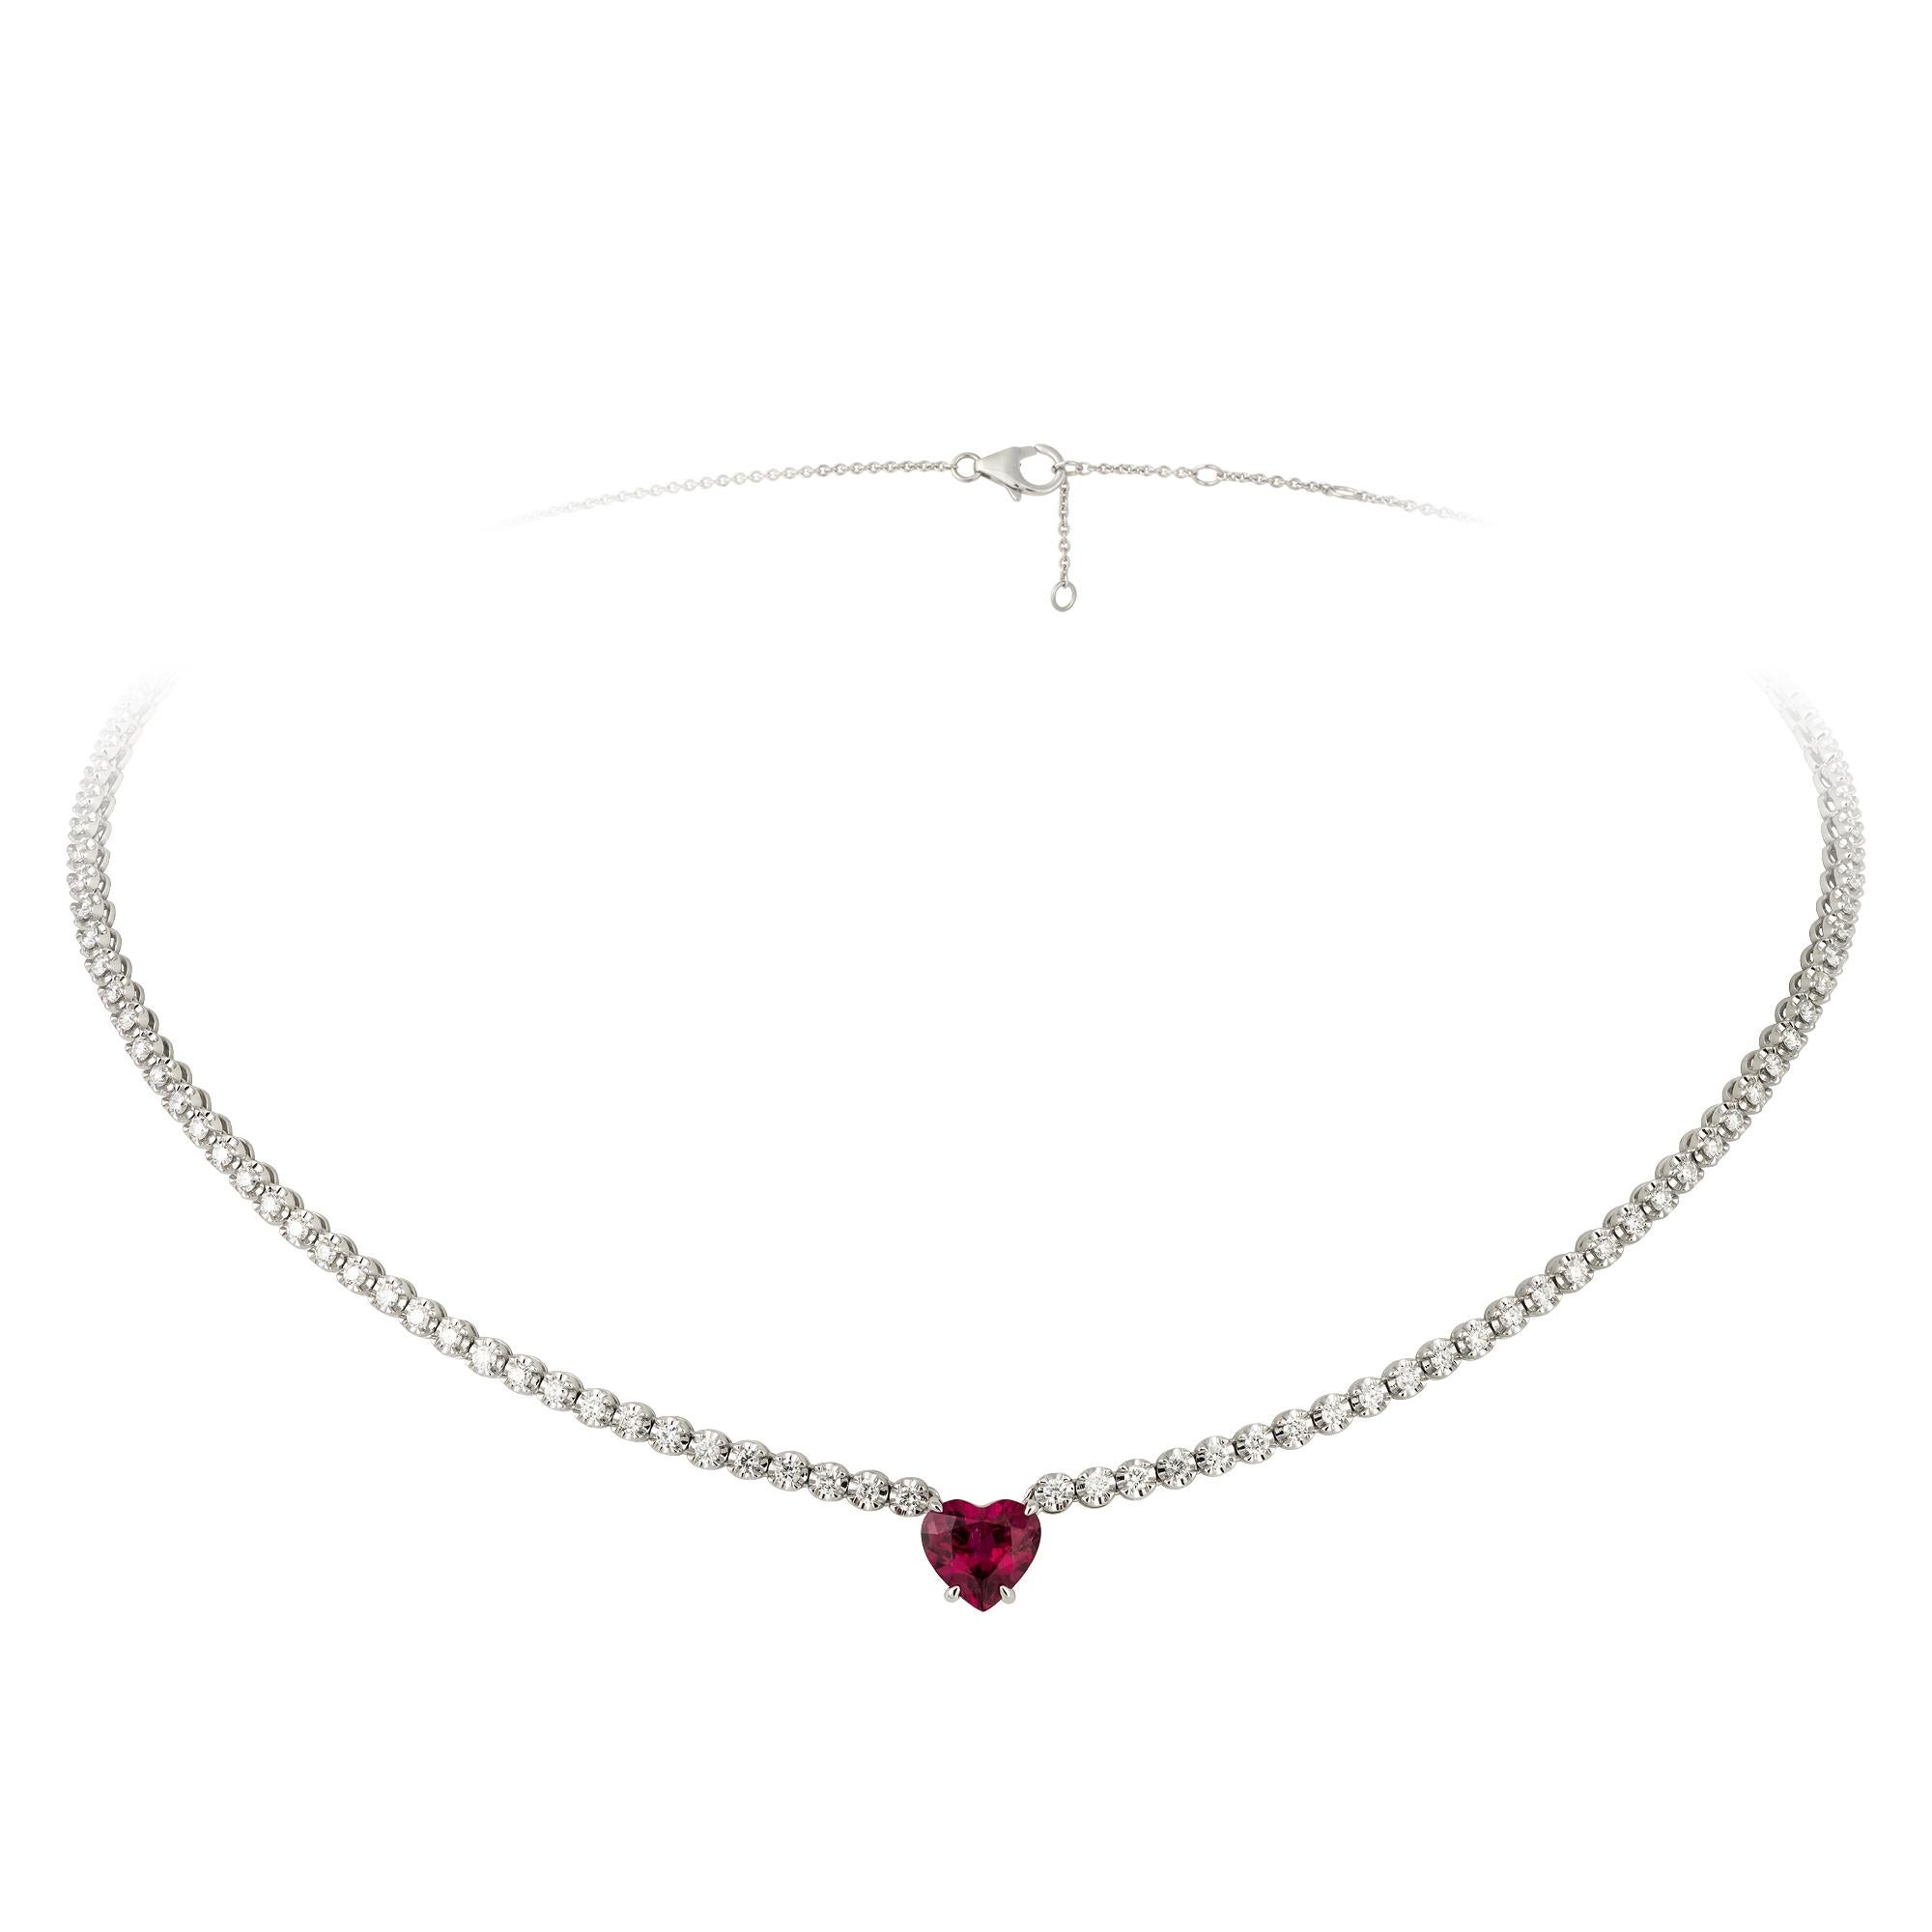 NECKLACE 18K White Gold 
Diamond 1.40 Cts/88 Pcs 
RL 1.43 Cts/1 Pcs

With a heritage of ancient fine Swiss jewelry traditions, NATKINA is a Geneva based jewellery brand, which creates modern jewellery masterpieces suitable for every day life.
It is